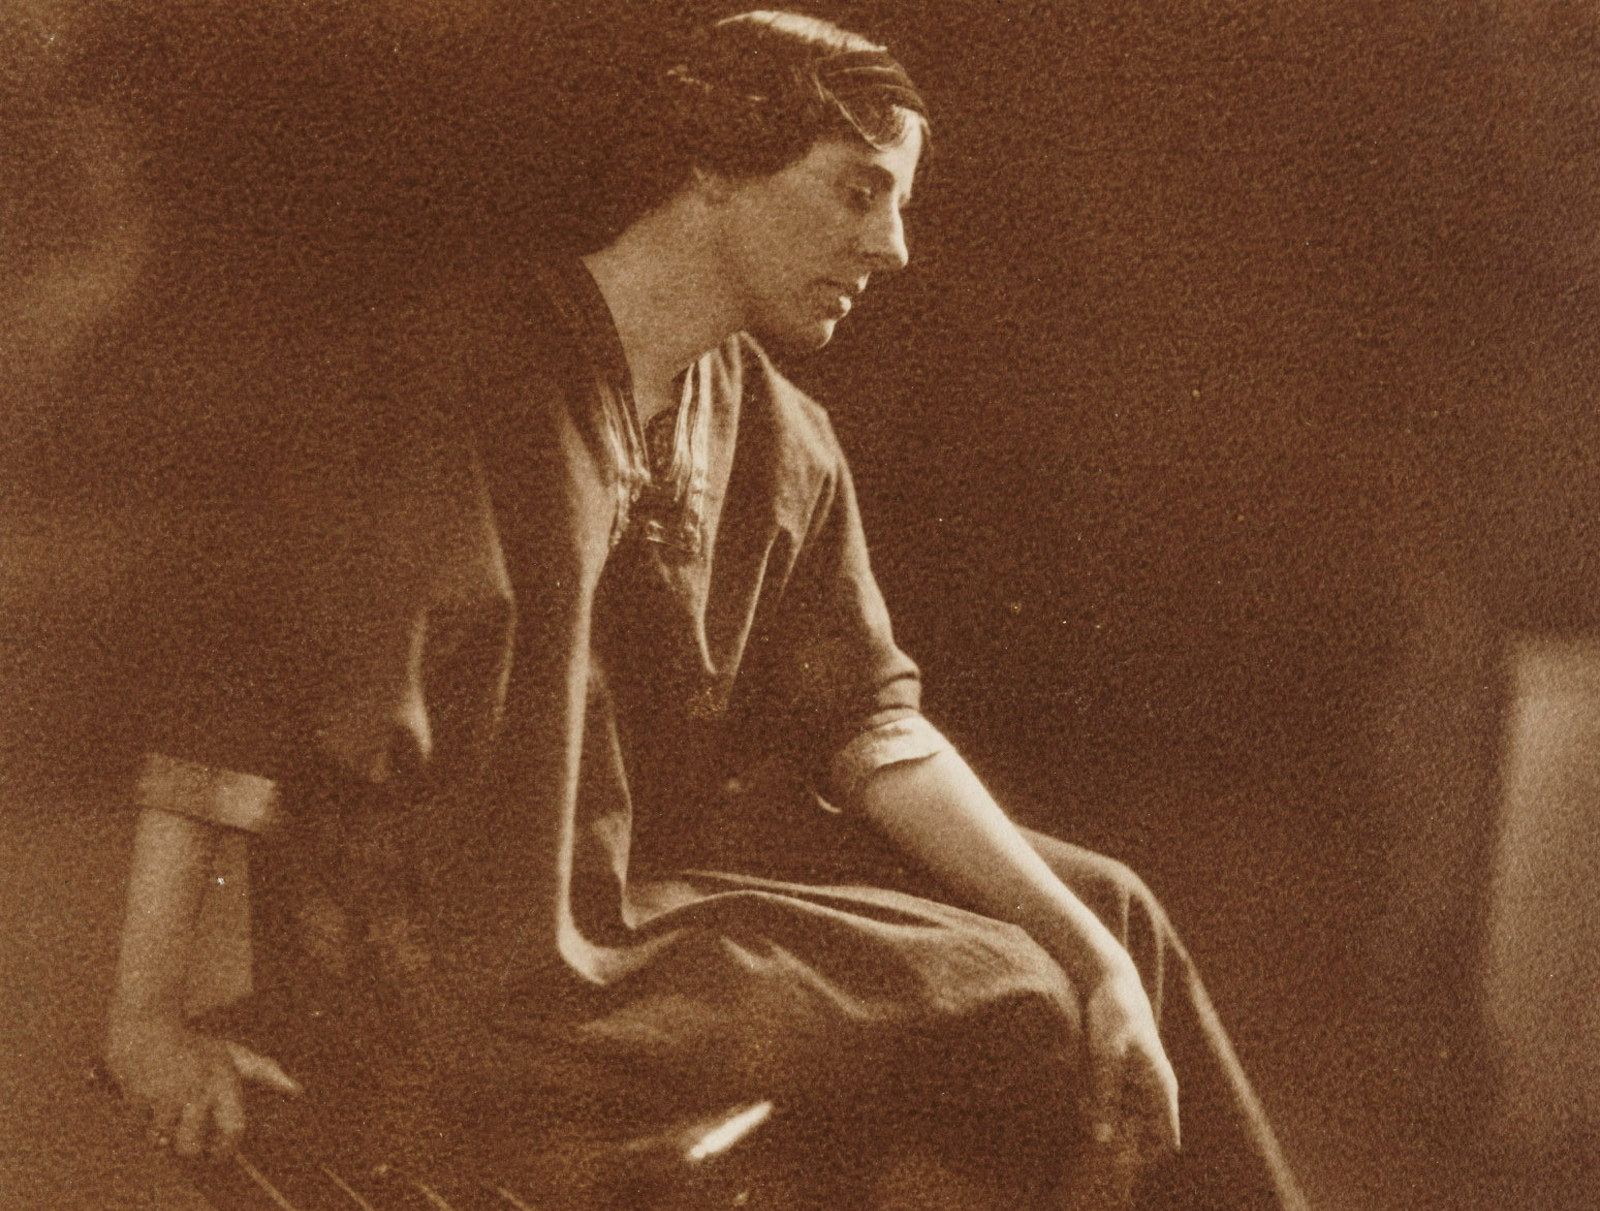 Portrait of Marion Mahony Griffin, ca. 1915